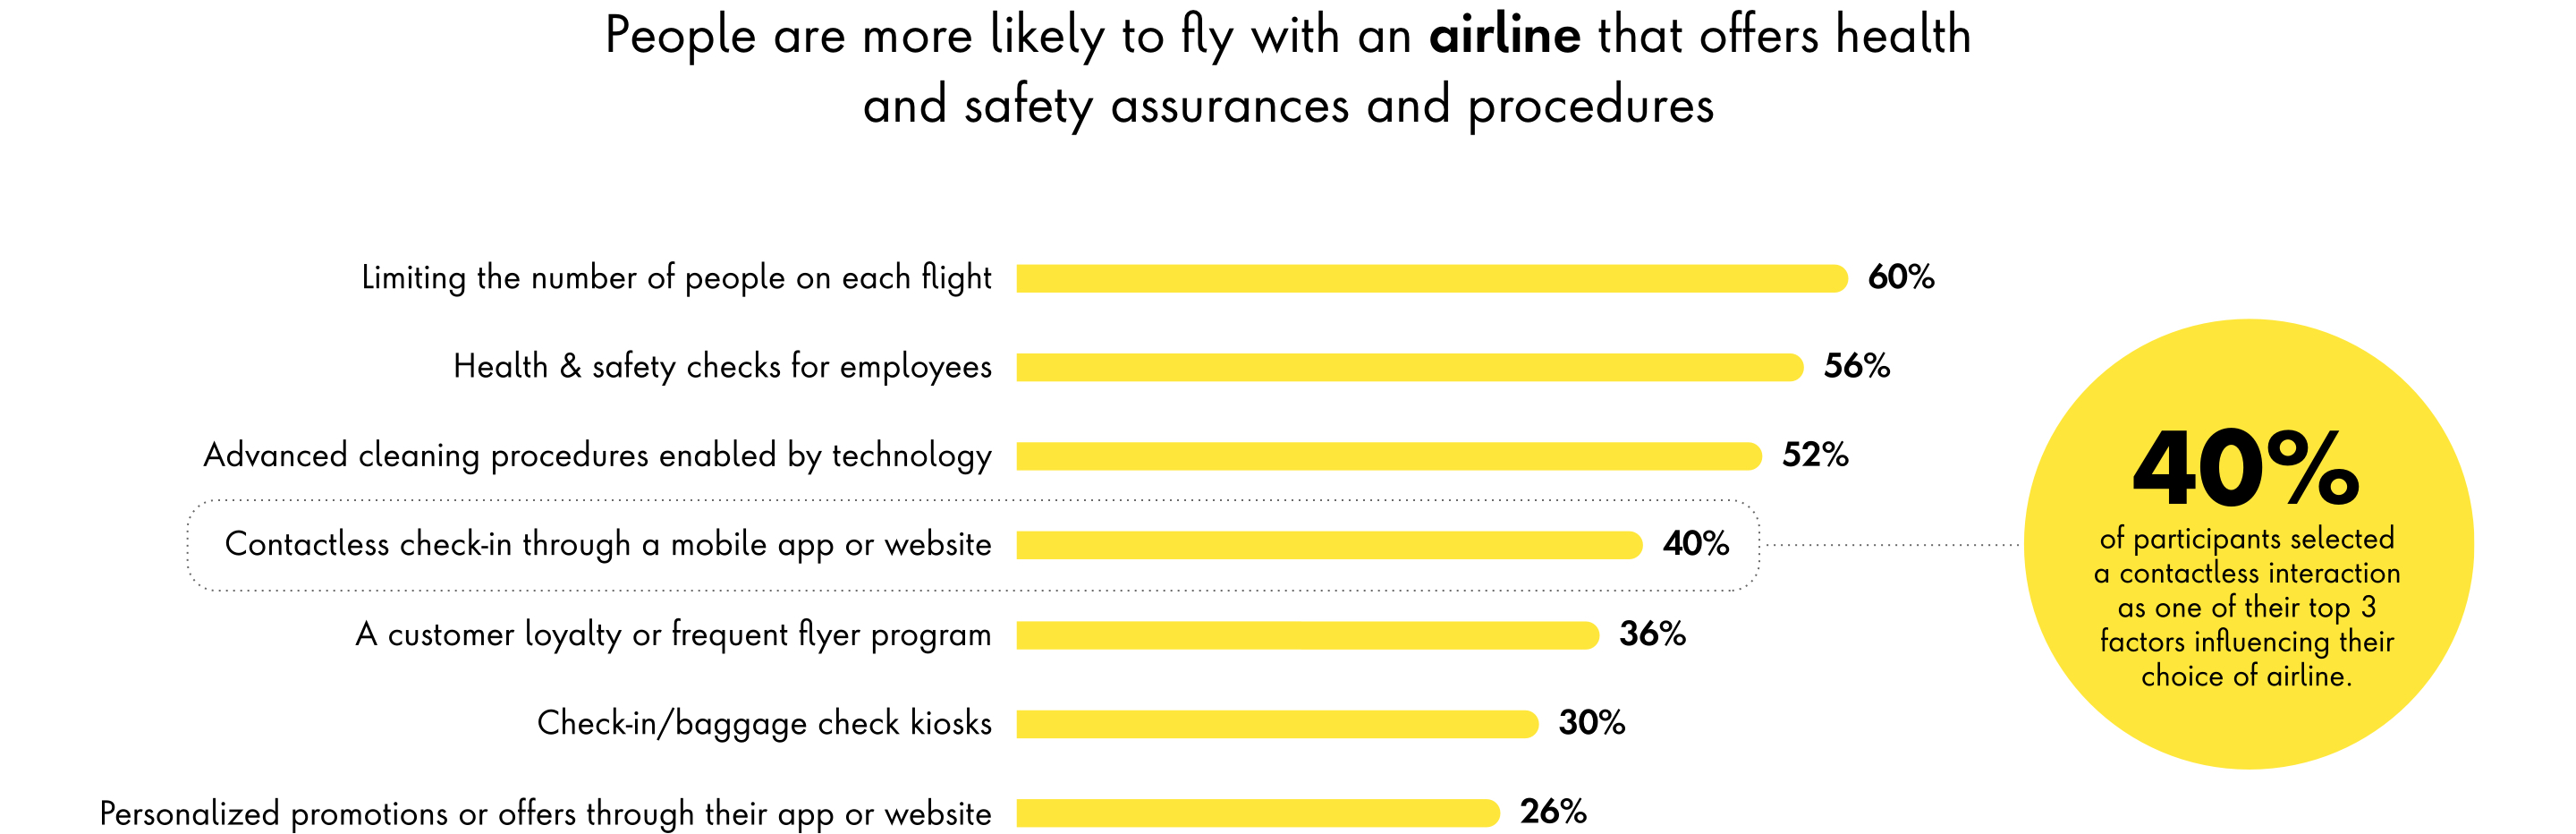 Chart: People are more likely to fly with an airline that offers health and safety assurances and procedures